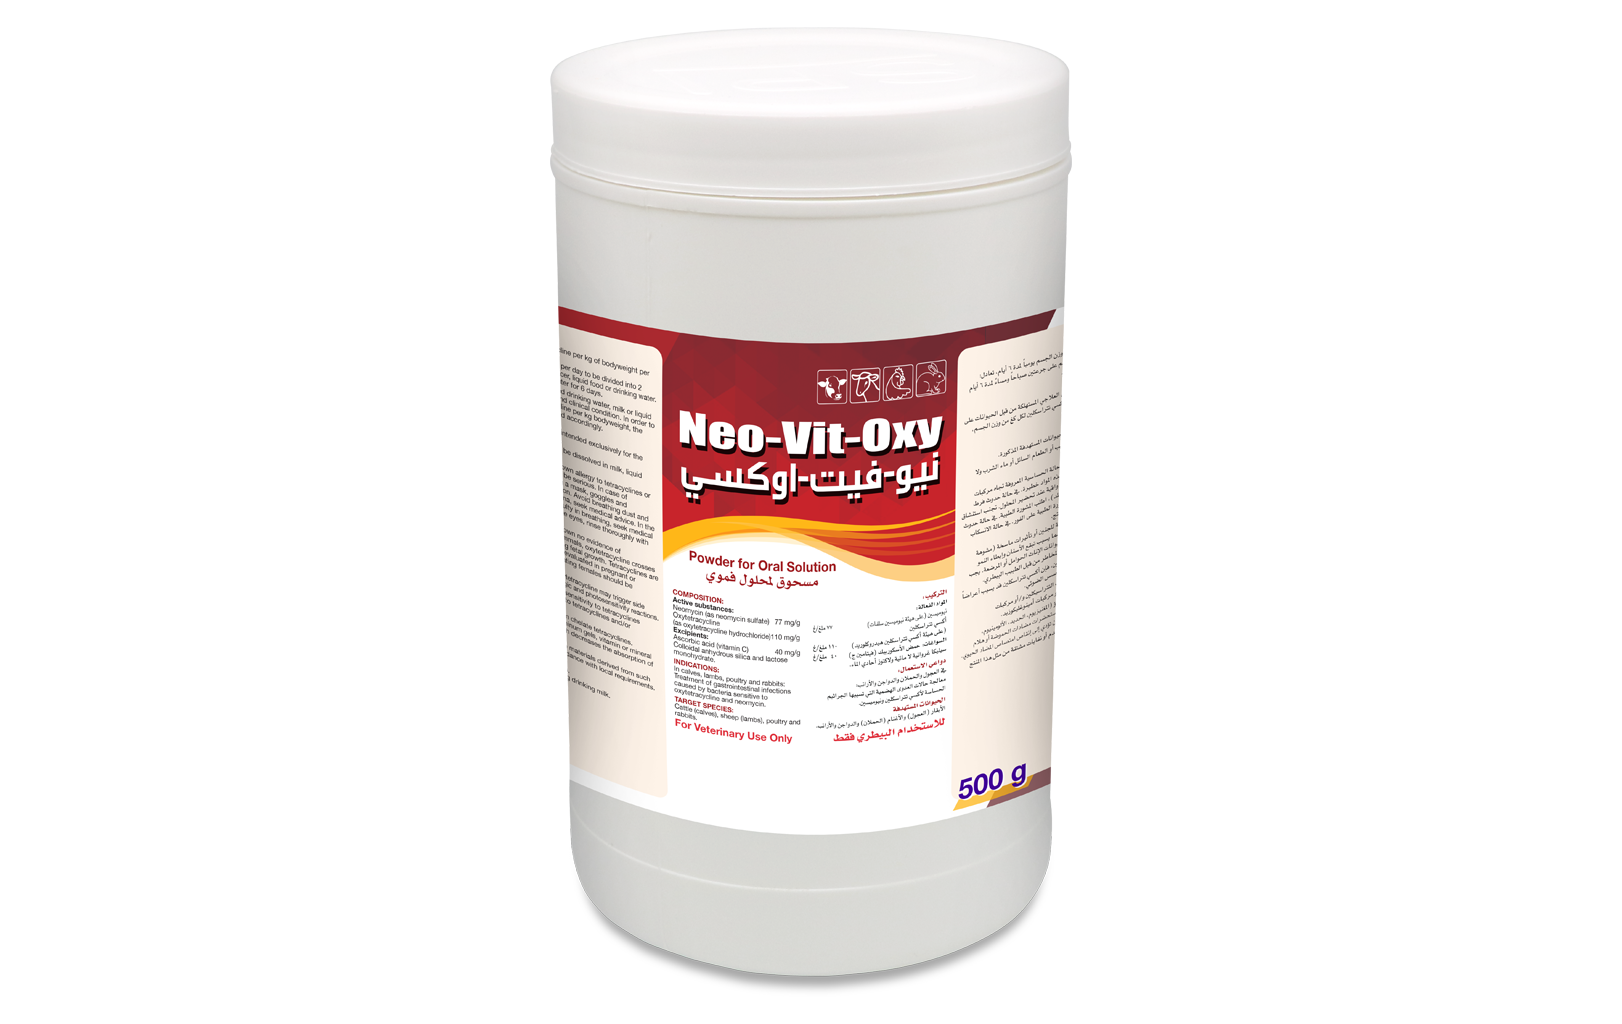 Neo-Vit-Oxy Powder for Oral Solution (500 g)